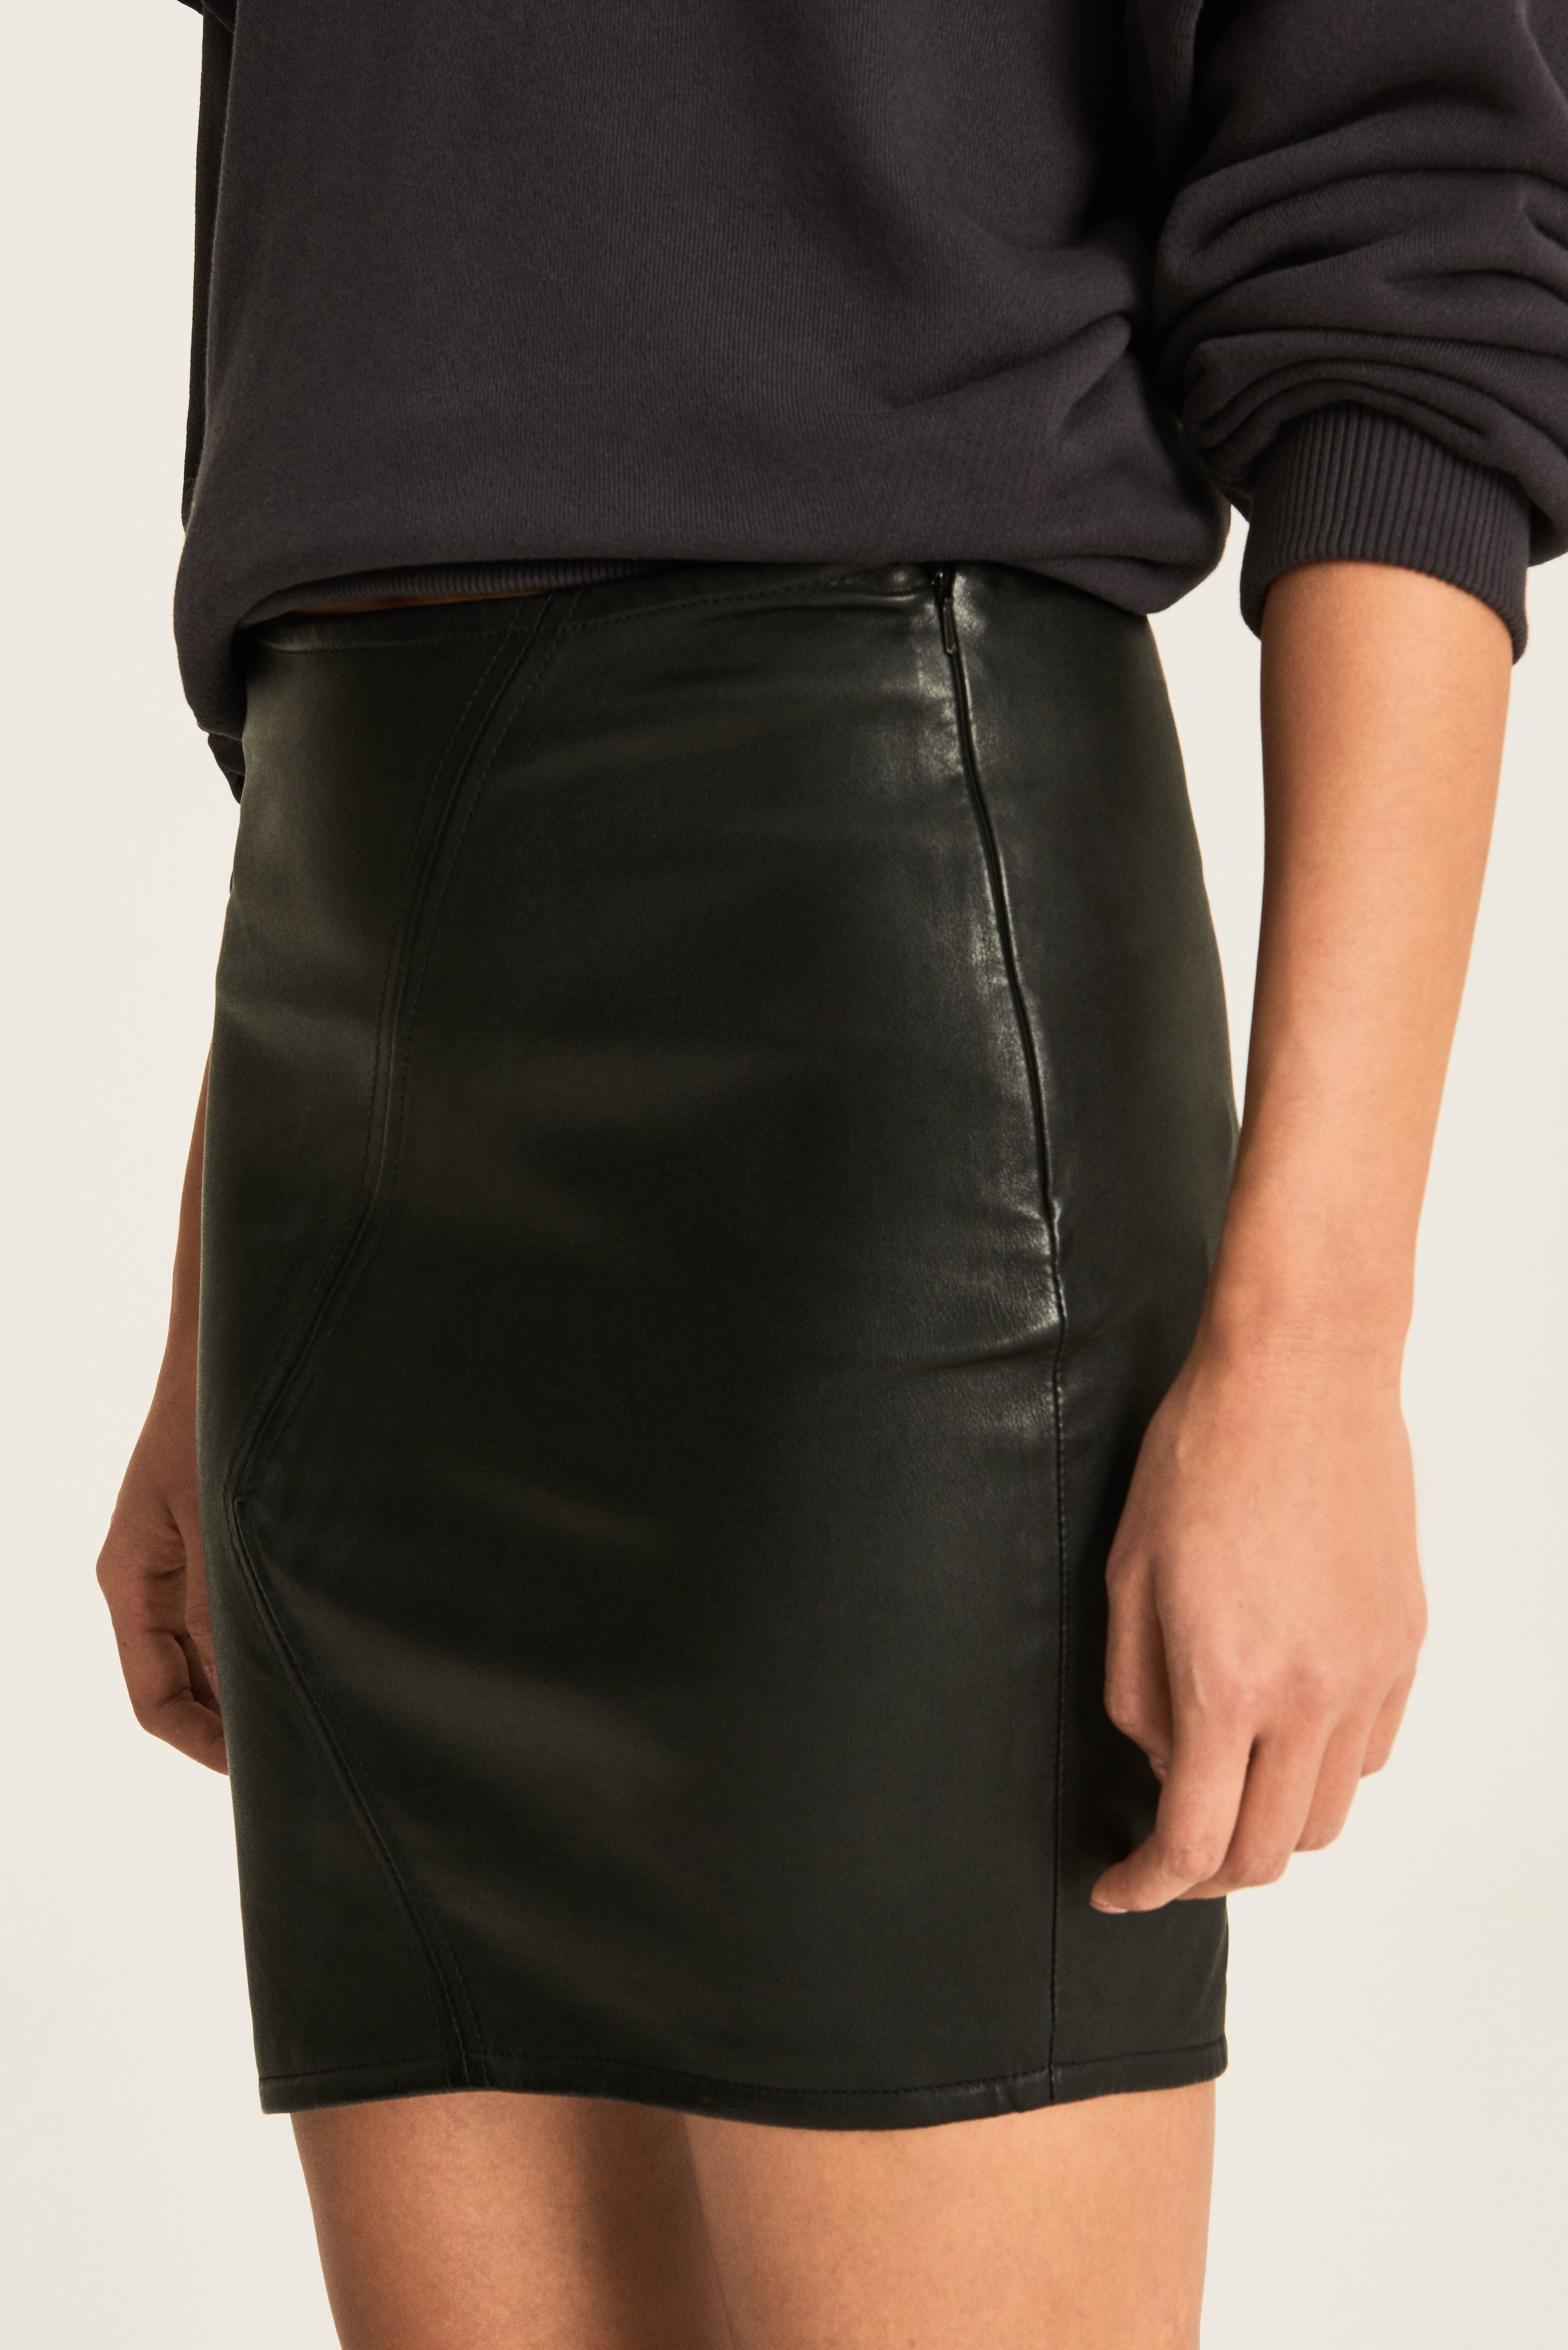 leather skirt night out outfits